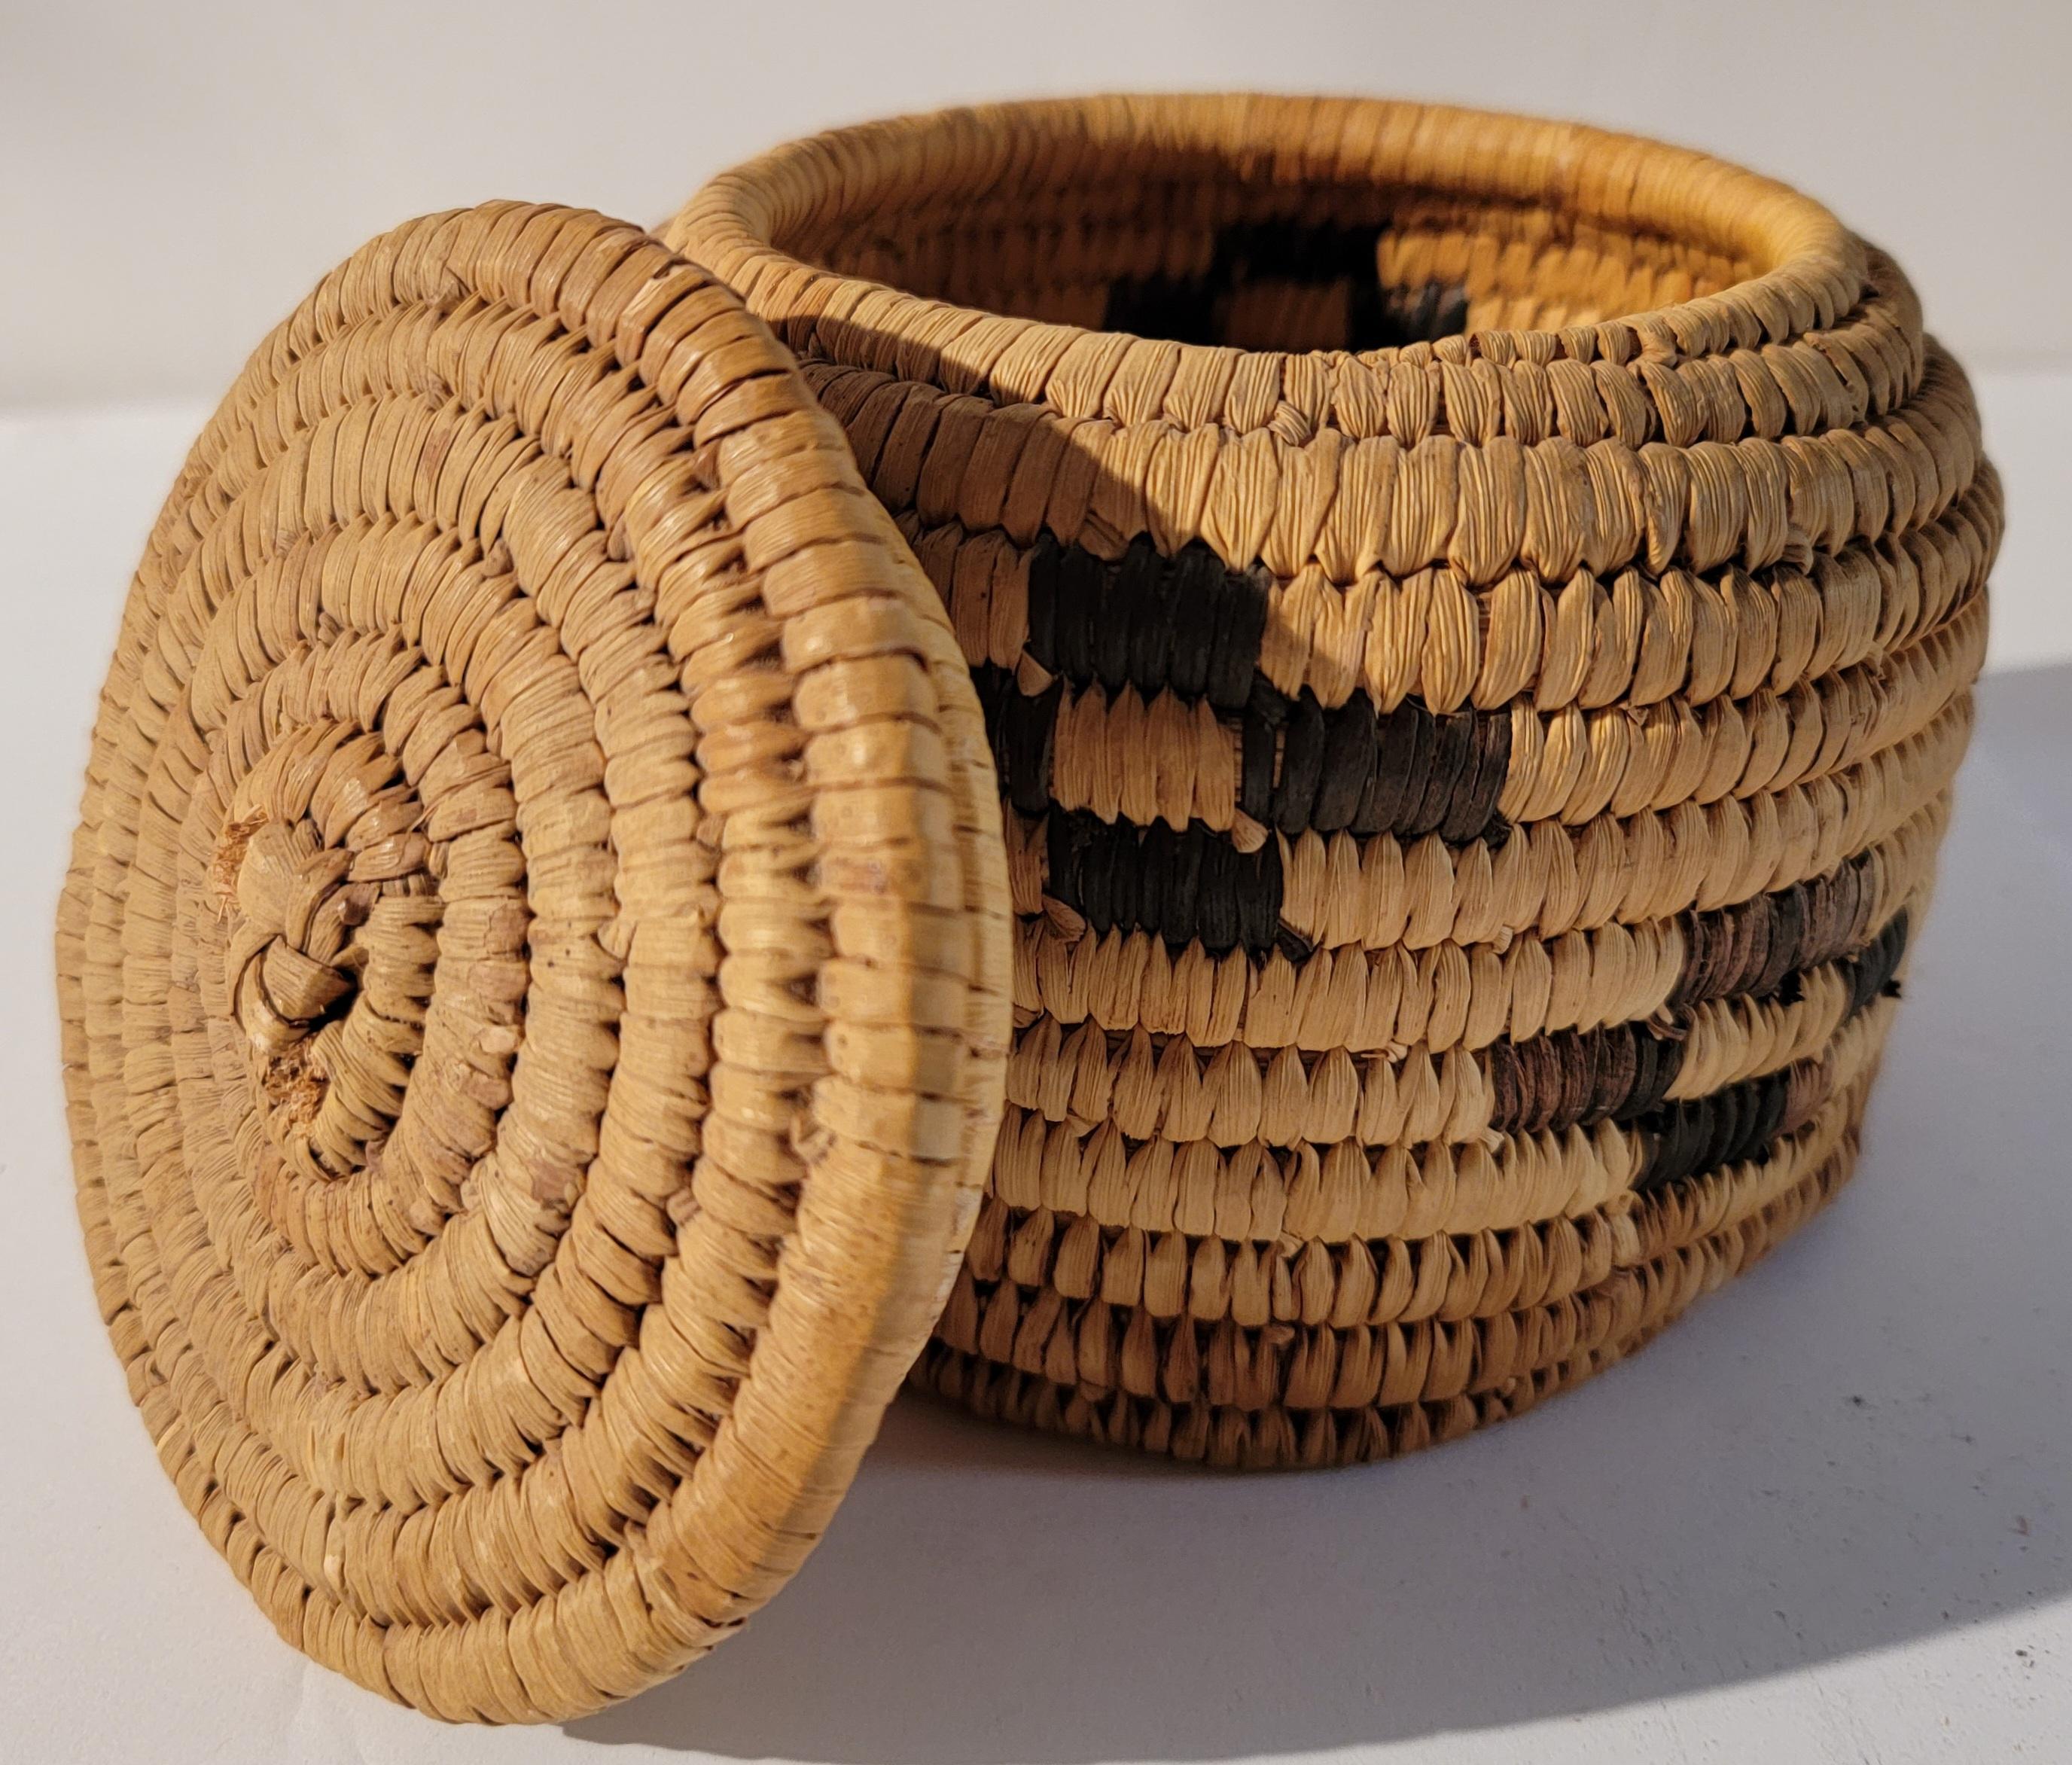 20th C small Papago basket lidded jar.
Great condition.